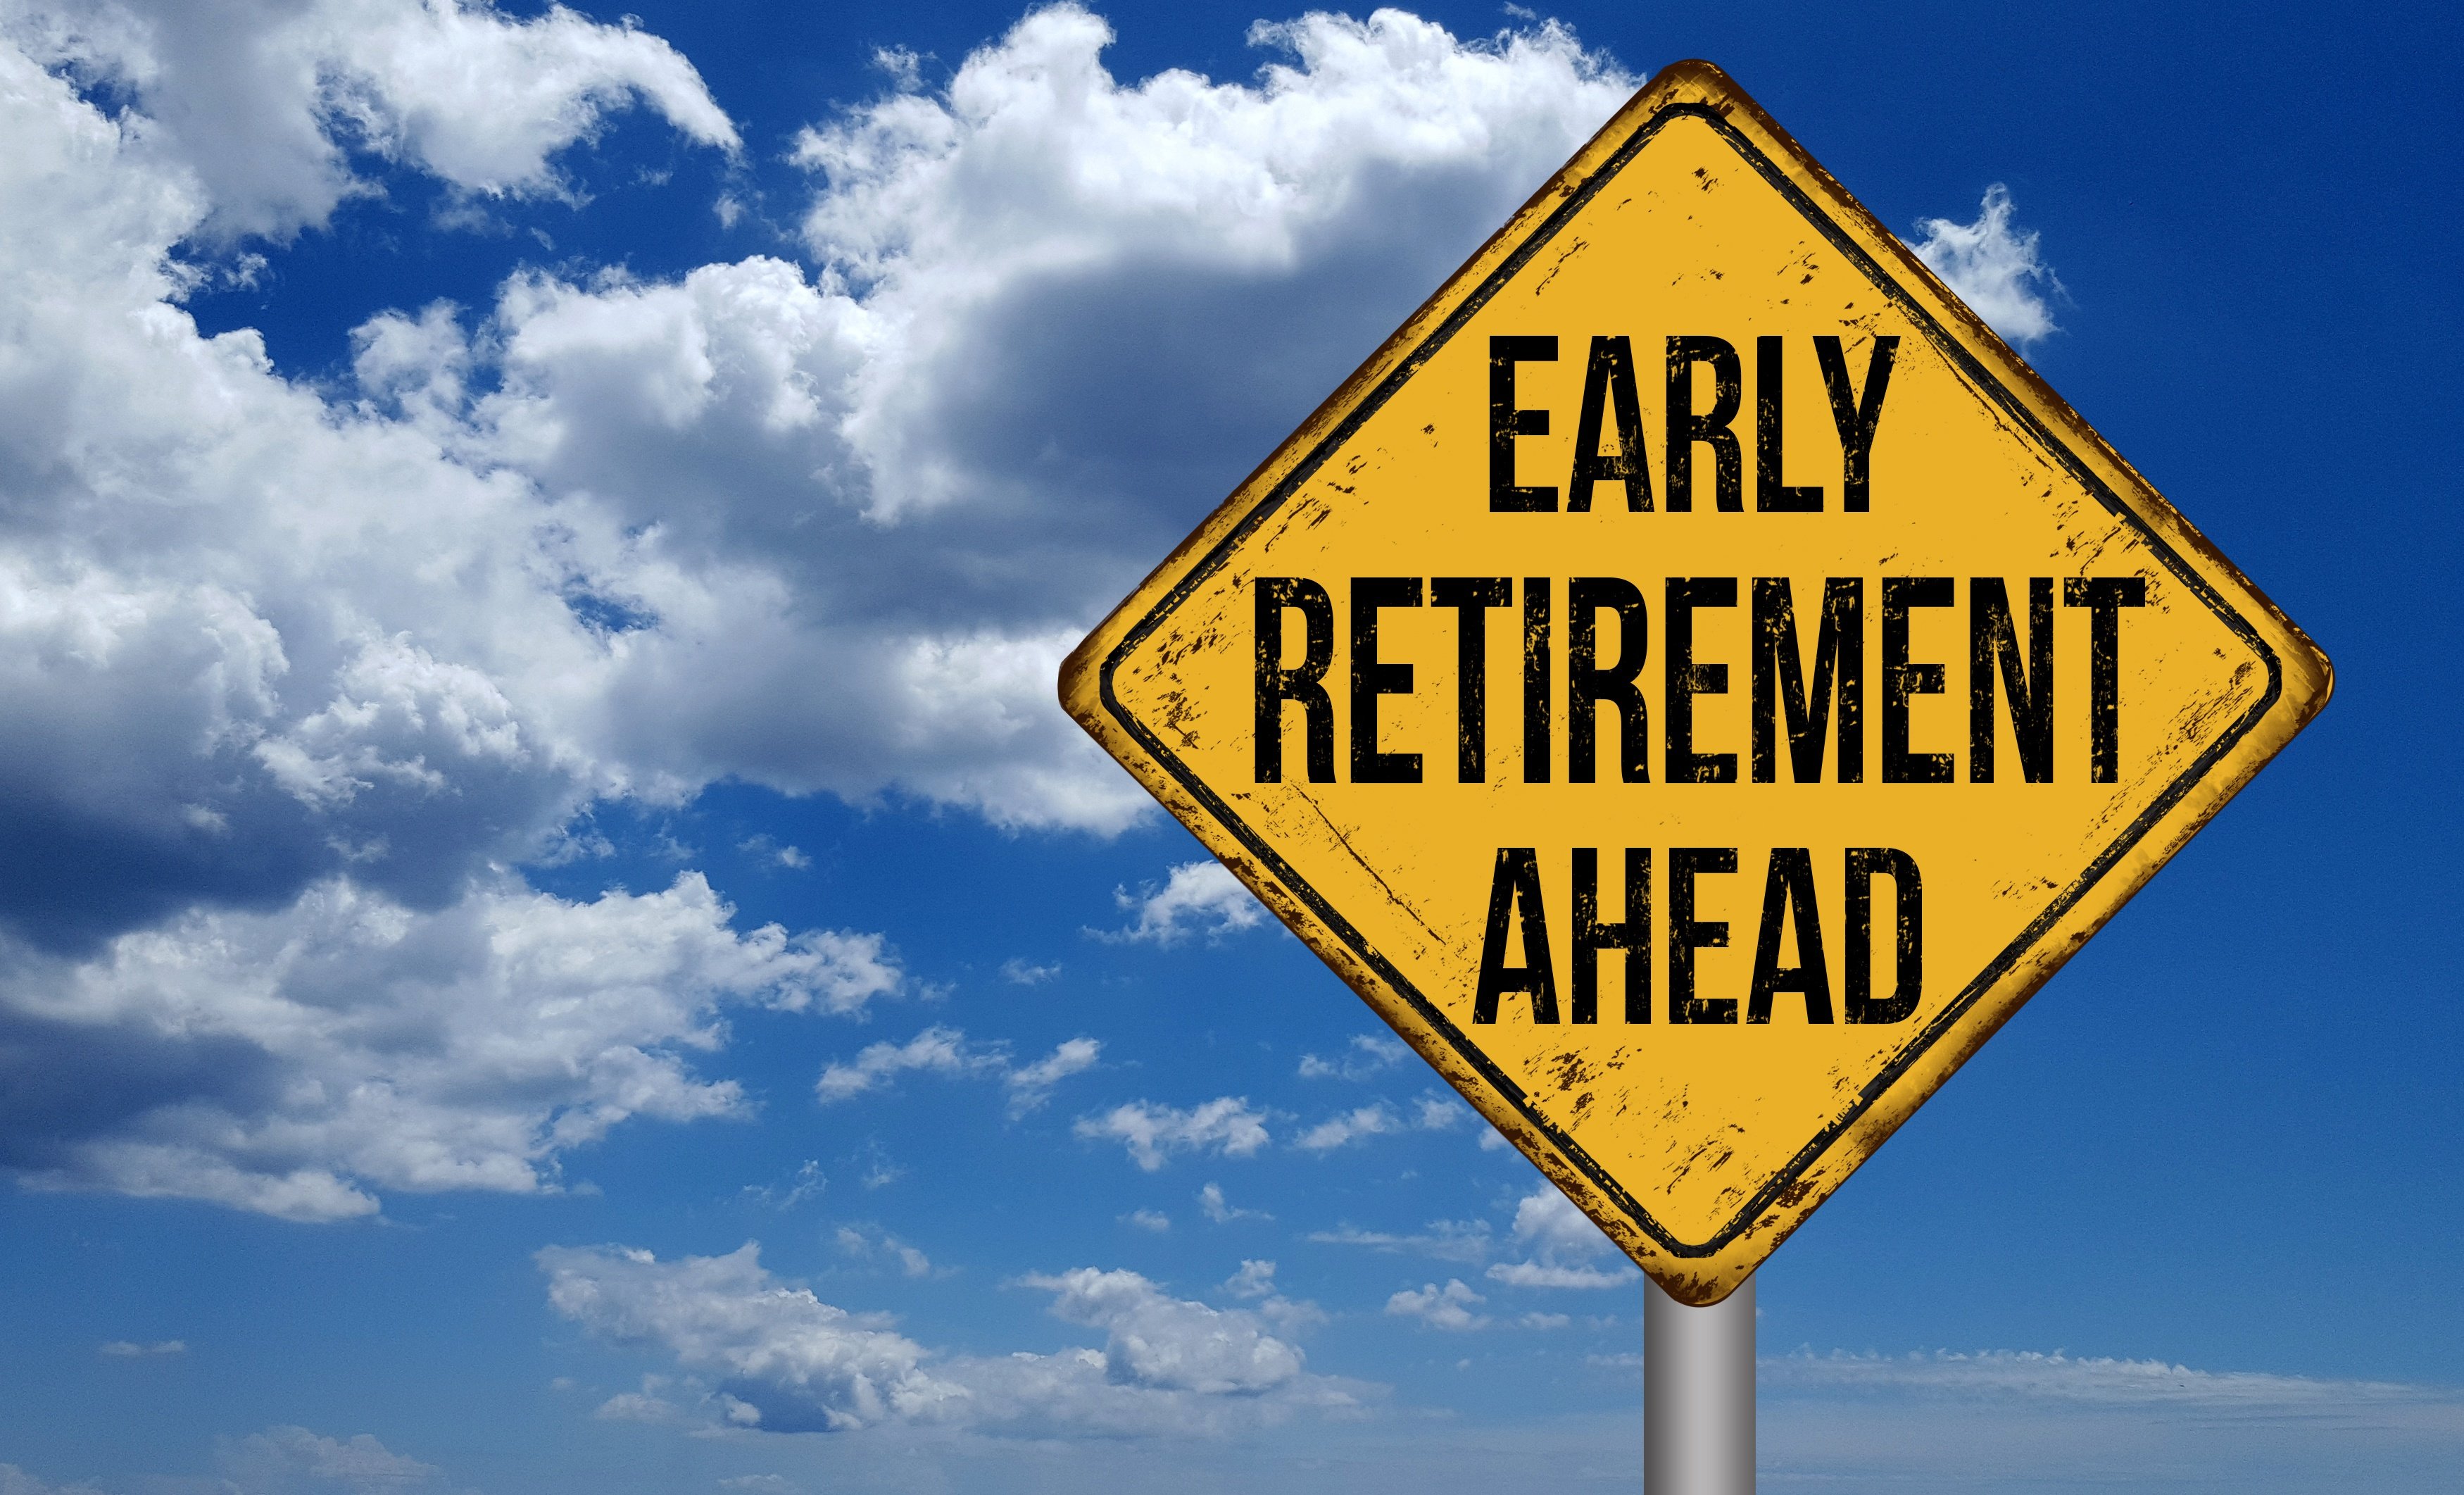 What is early retirement 